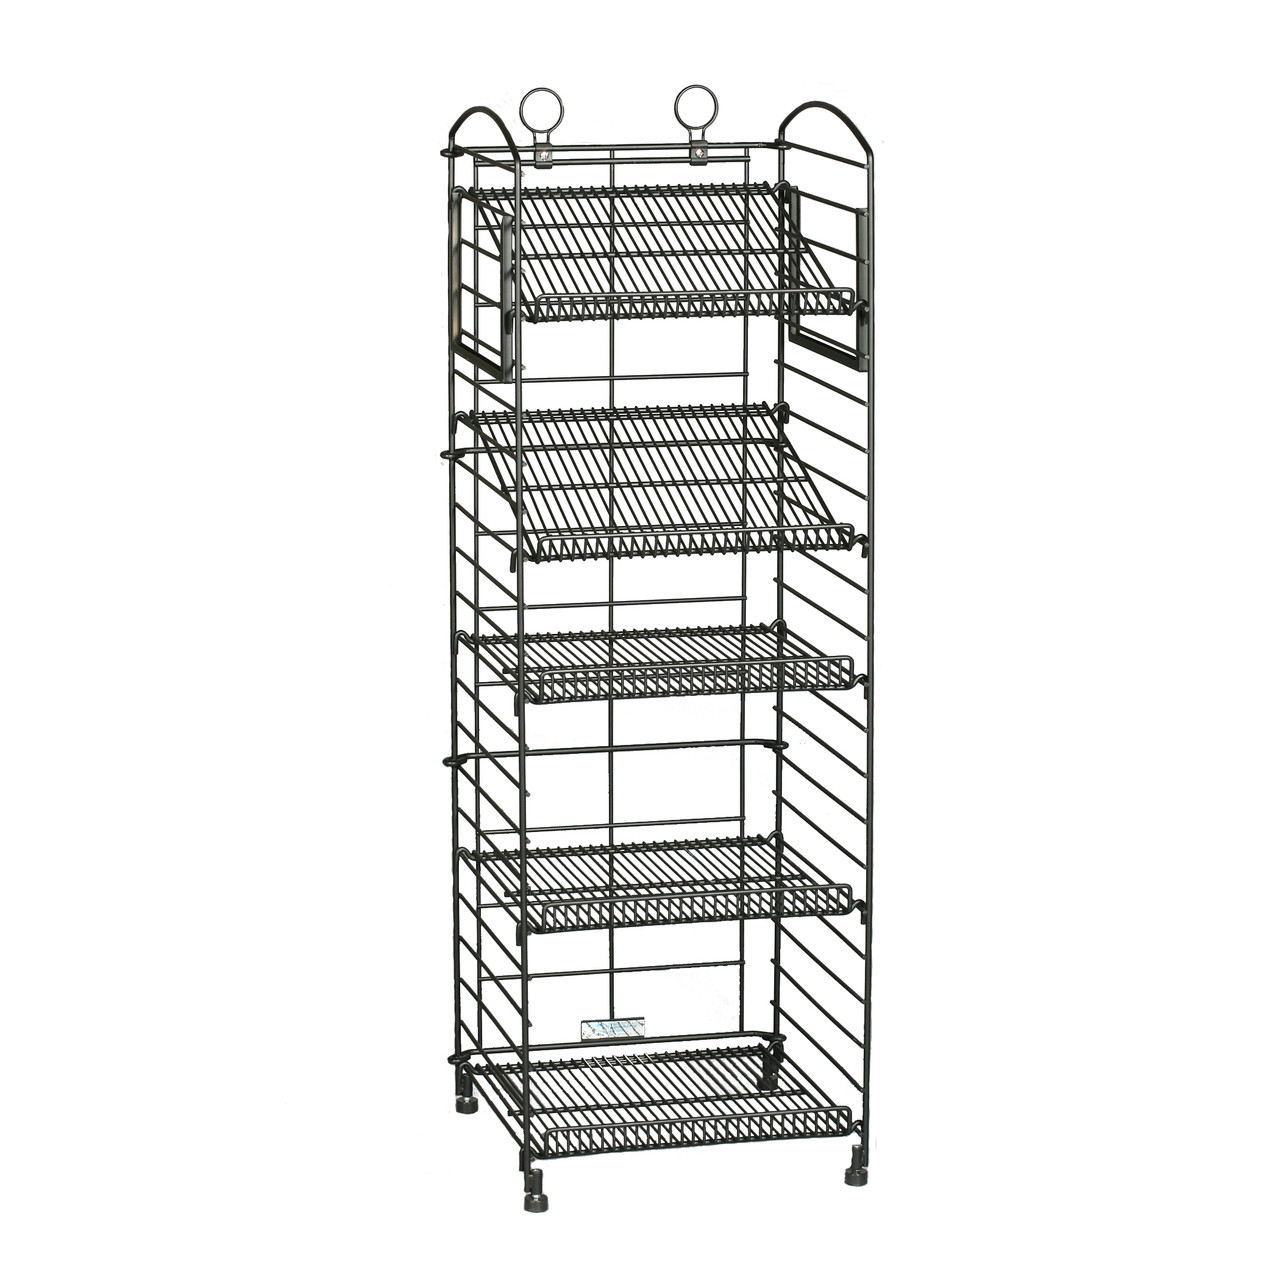 Fold-Up Wire Display Rack The Global Display Solution™